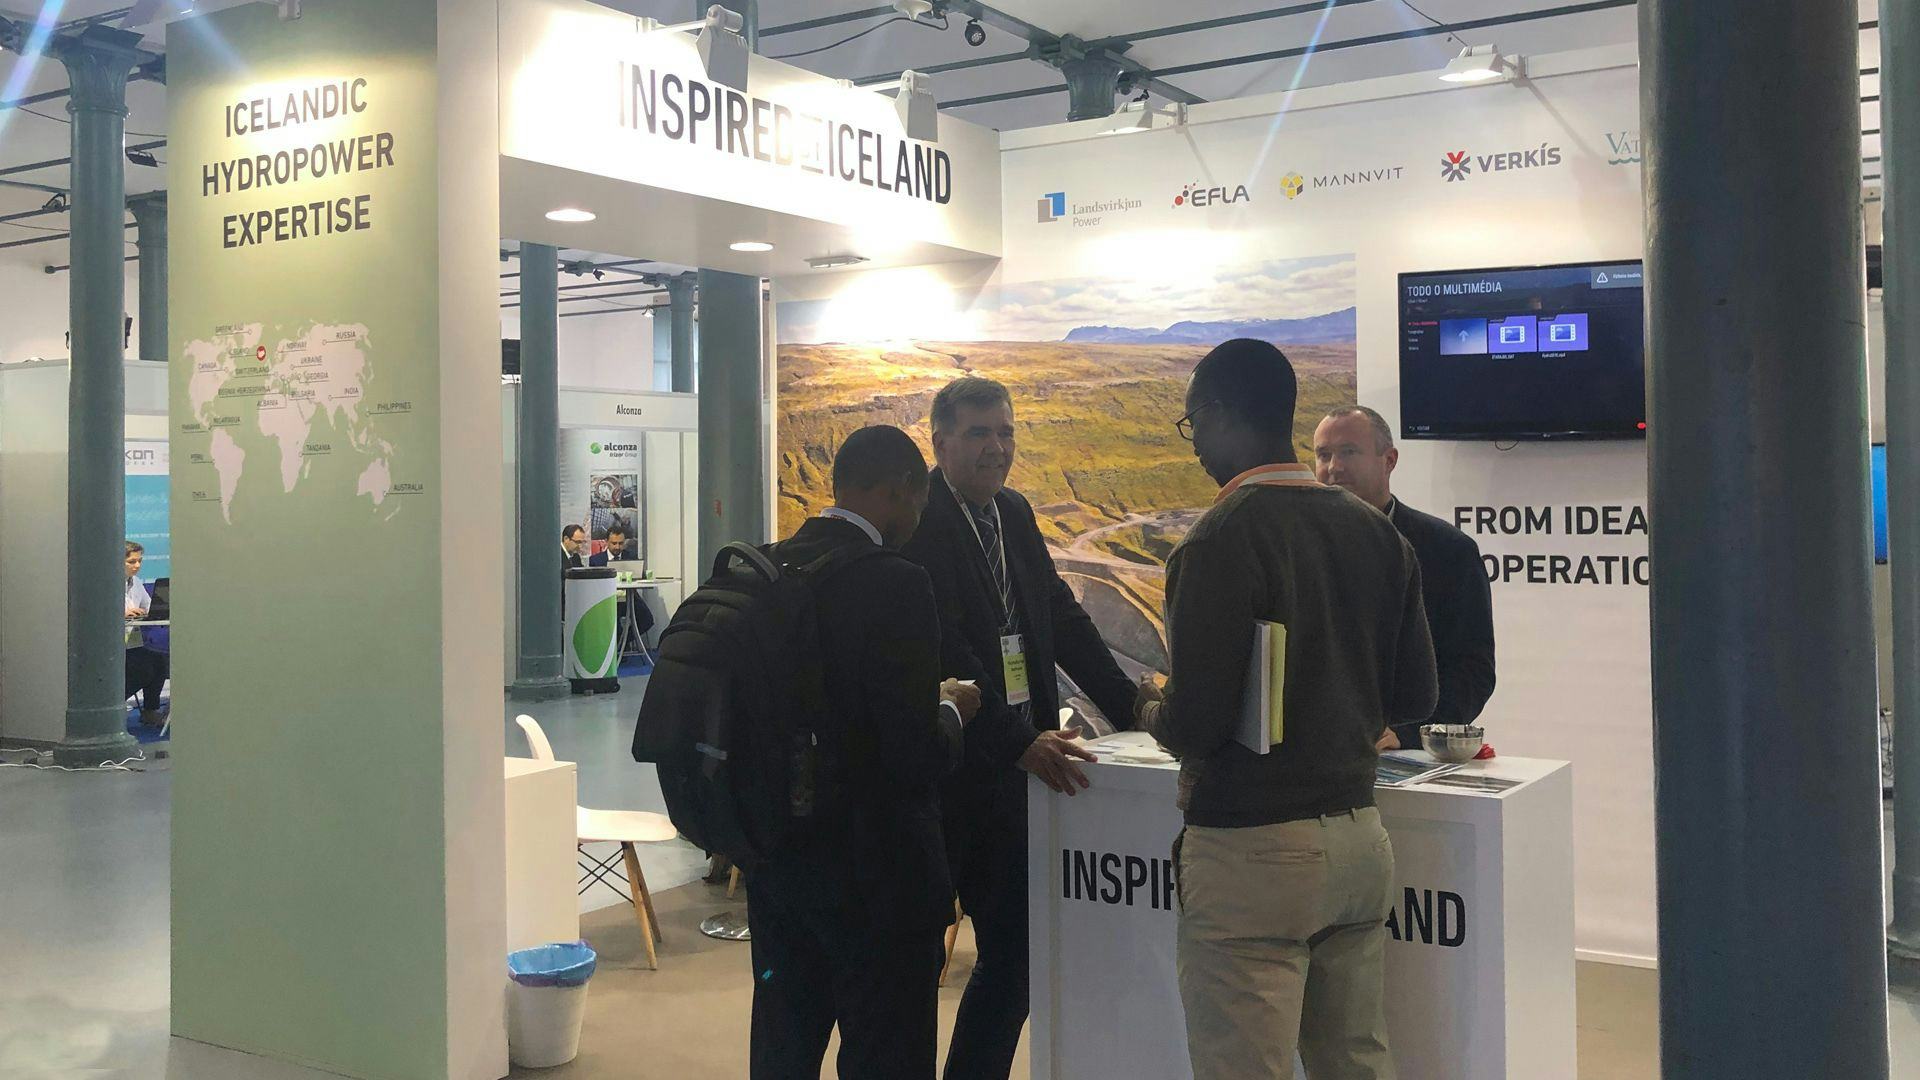 Four men having a discussion in a promotional booth for INSPIREDBYICELAND